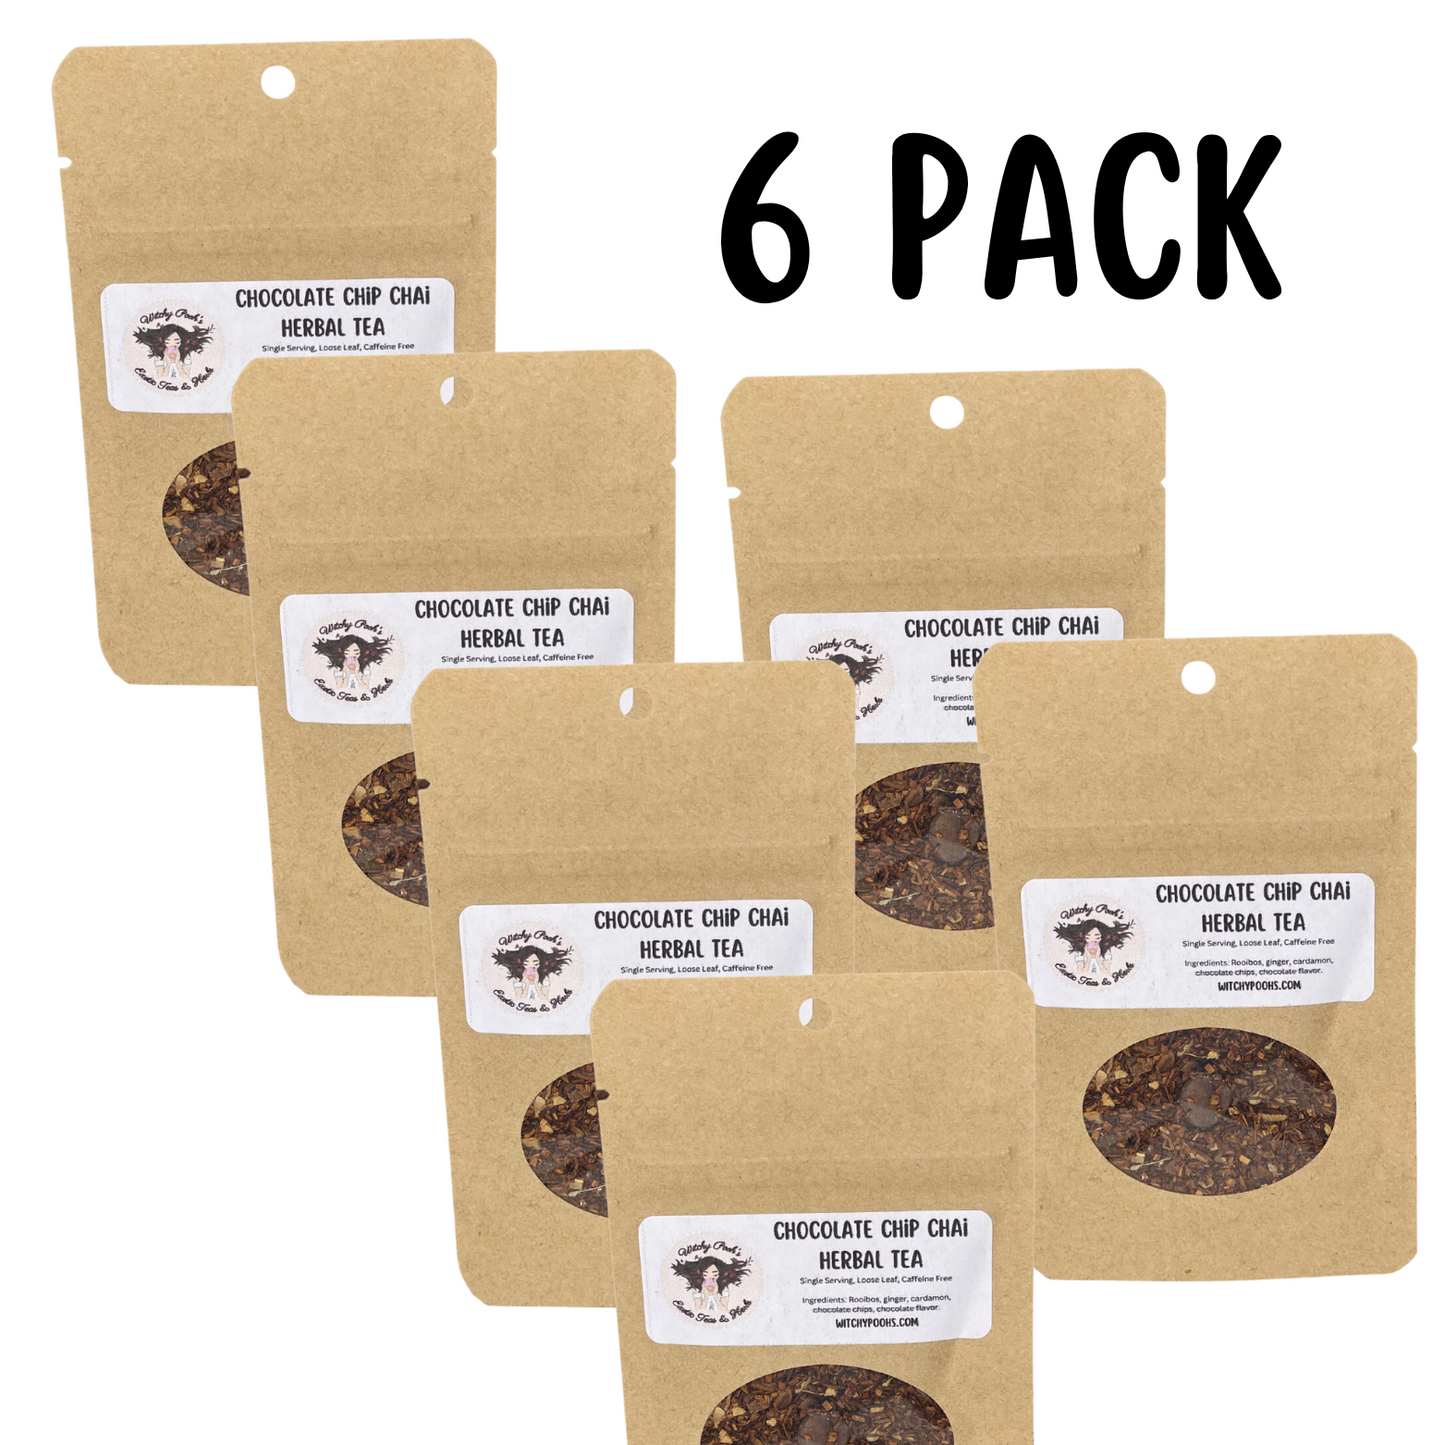 Witchy Pooh's Chocolate Chip Chai Loose Leaf Rooibos Herbal Tea with Real Chocolate Chips!-11